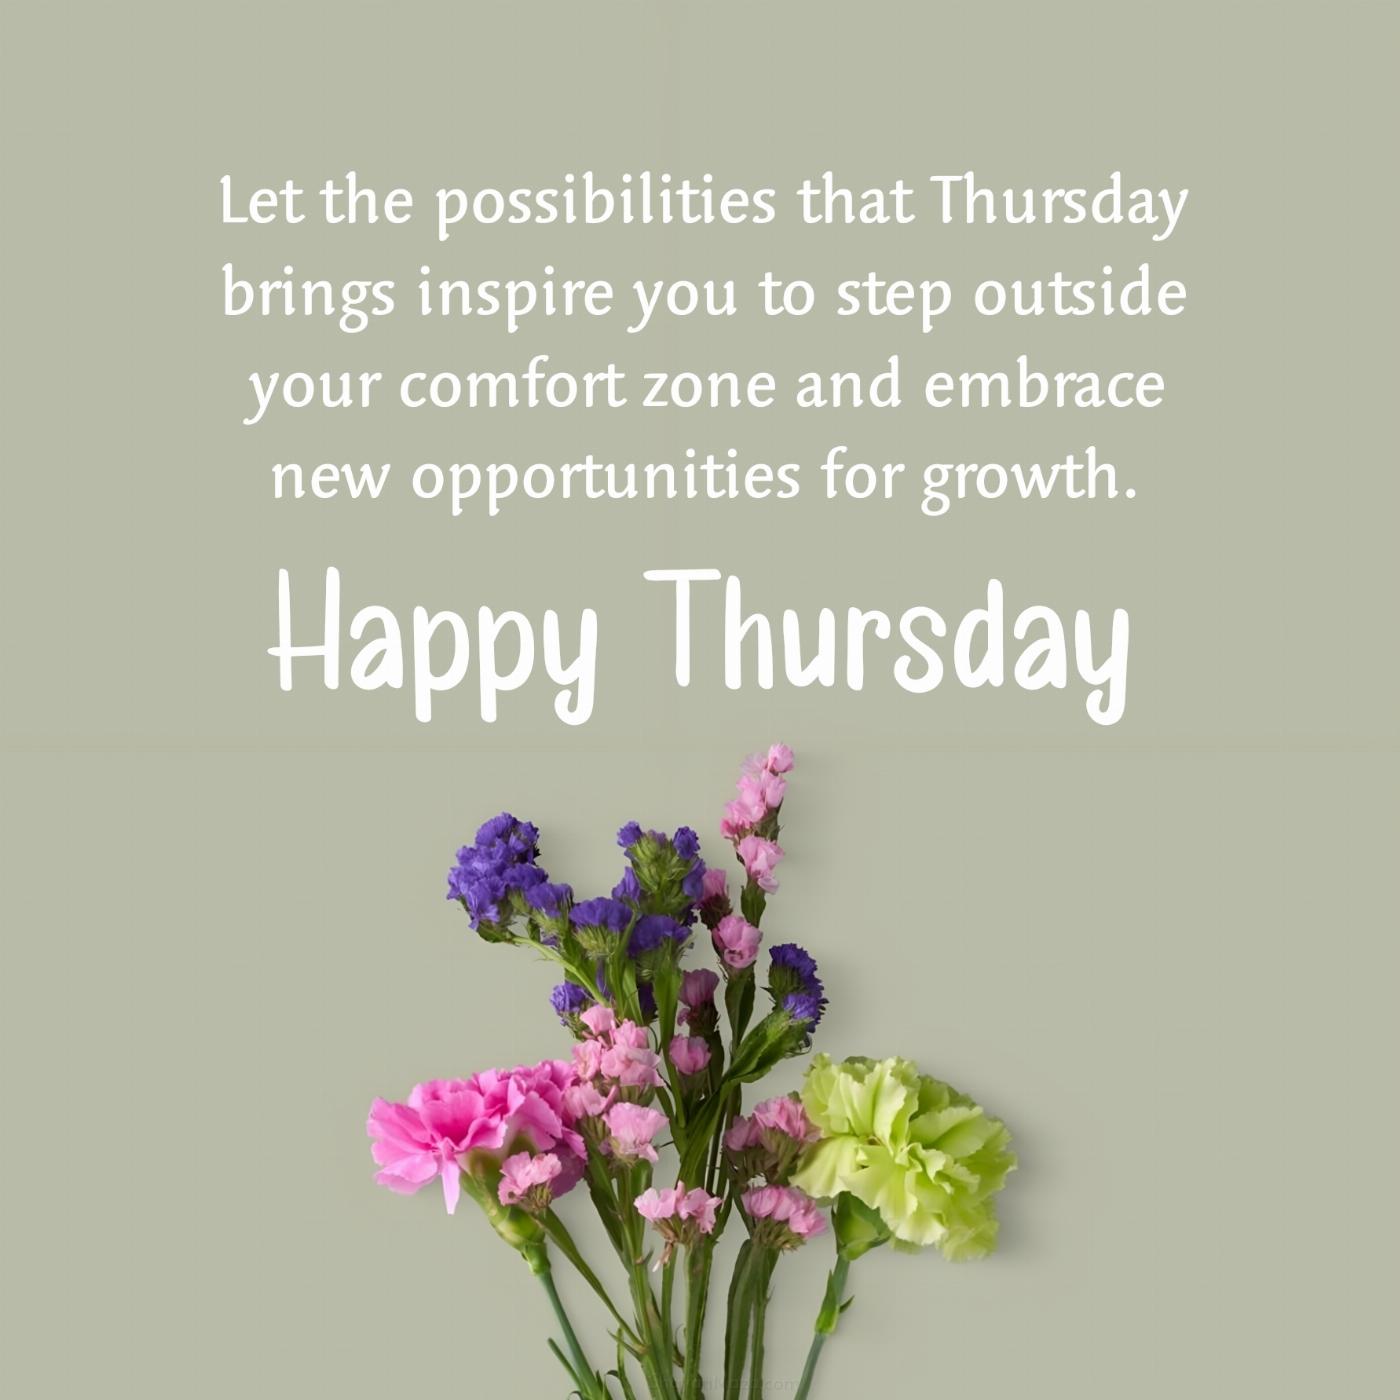 Let the possibilities that Thursday brings inspire you to step outside